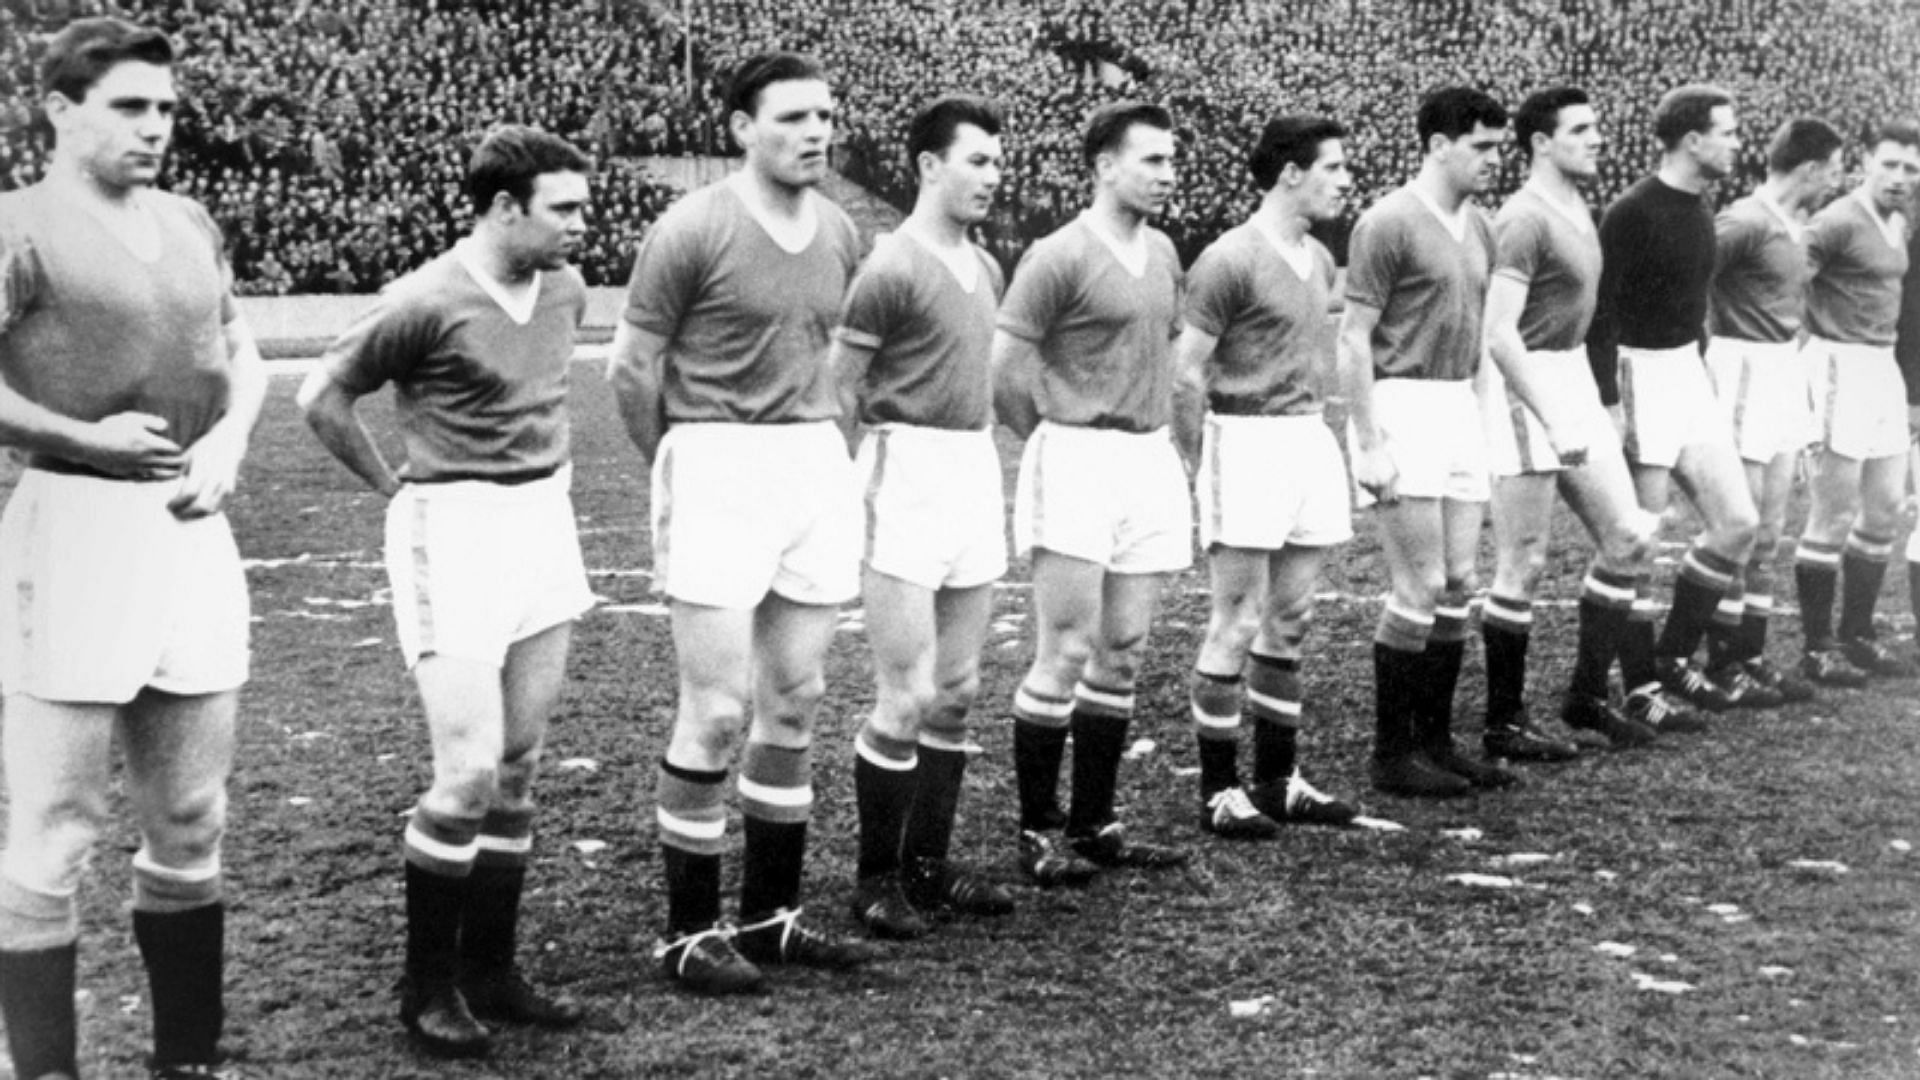 The Busby Babes taking the field one last time before the ill-fated day